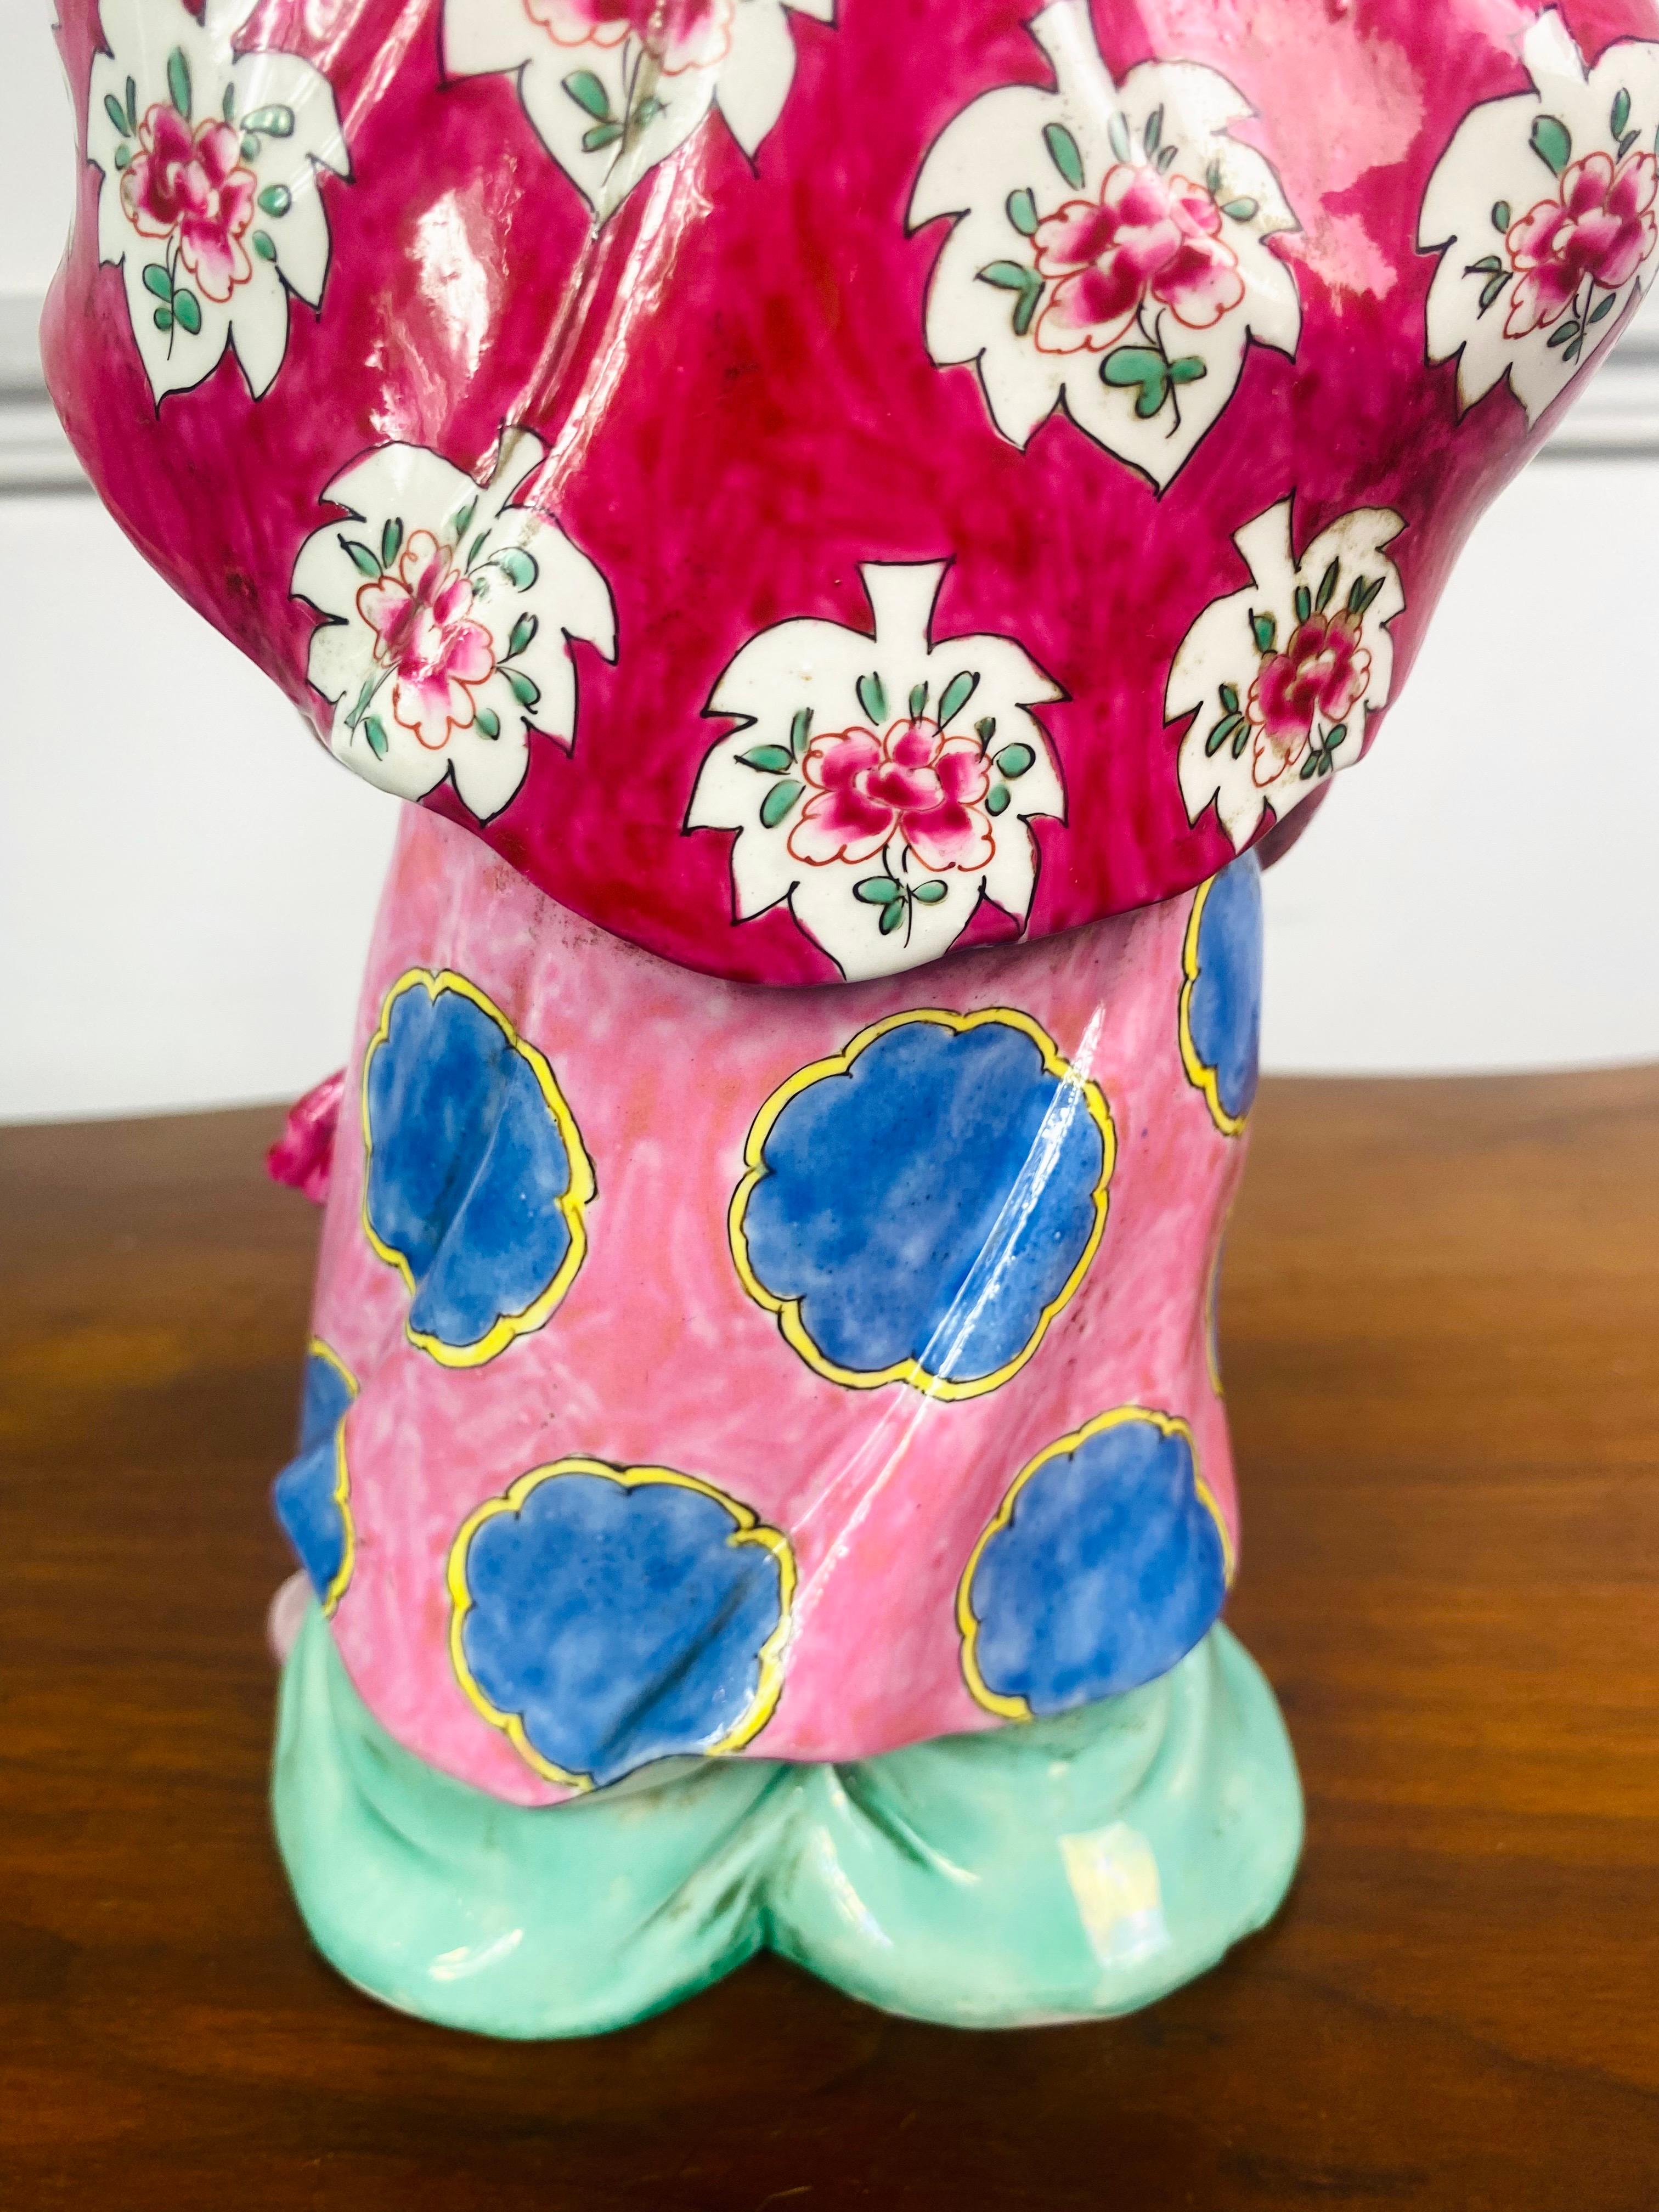 Shou Lao Chinese Porcelain Statuette God of Longevity - pink - China Qing Period For Sale 3